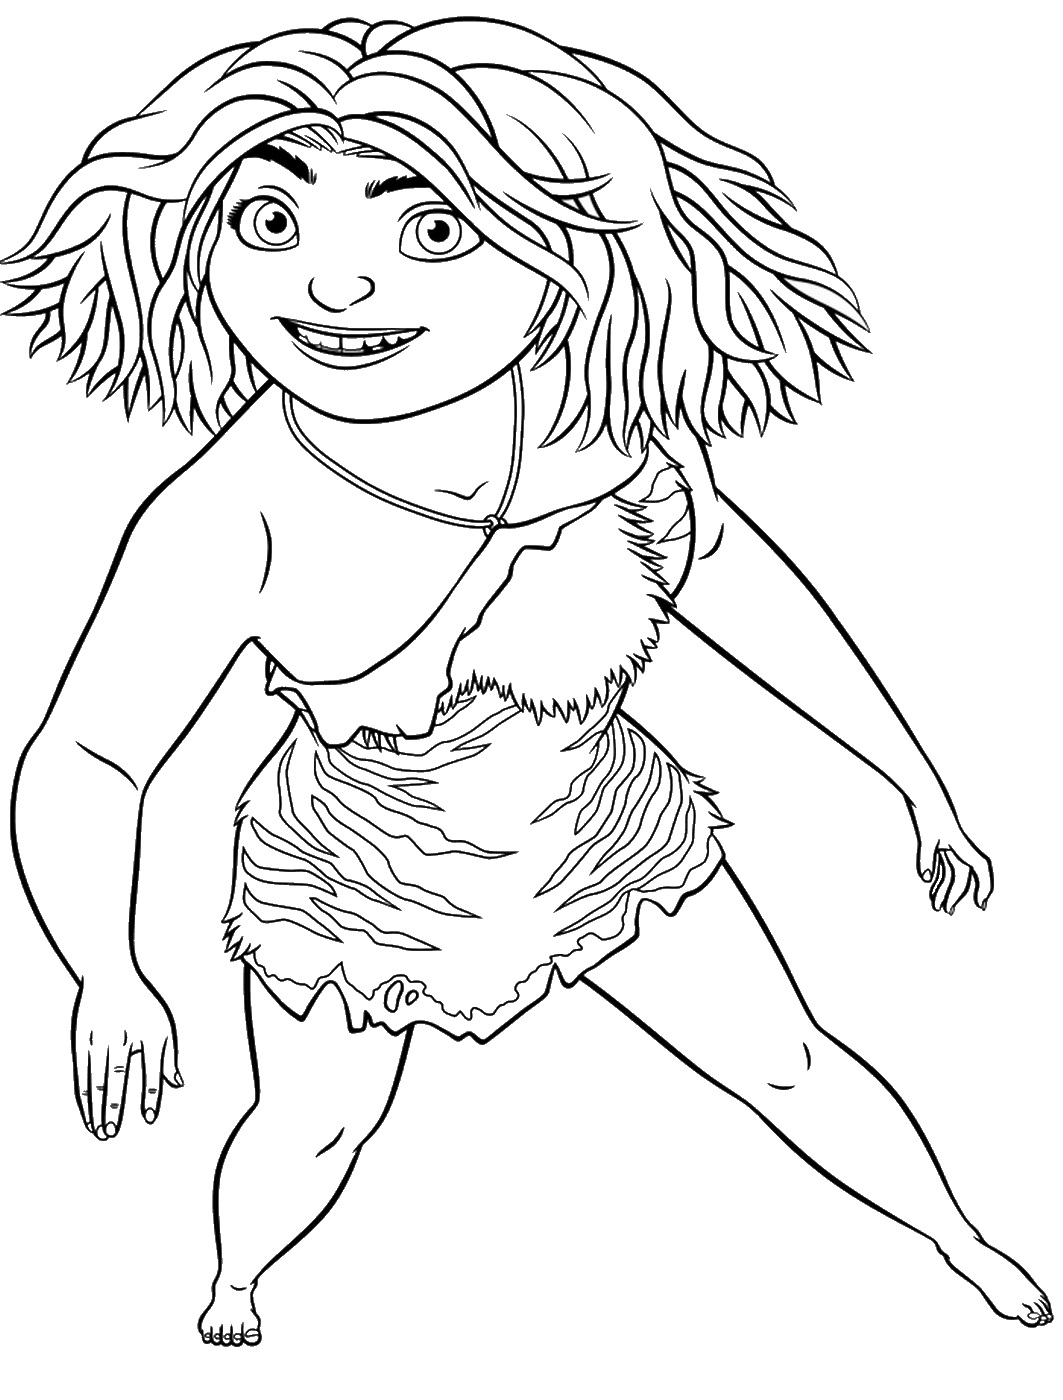 The Croods Coloring Pages TV Film croods_cl_13 Printable 2020 08580 Coloring4free